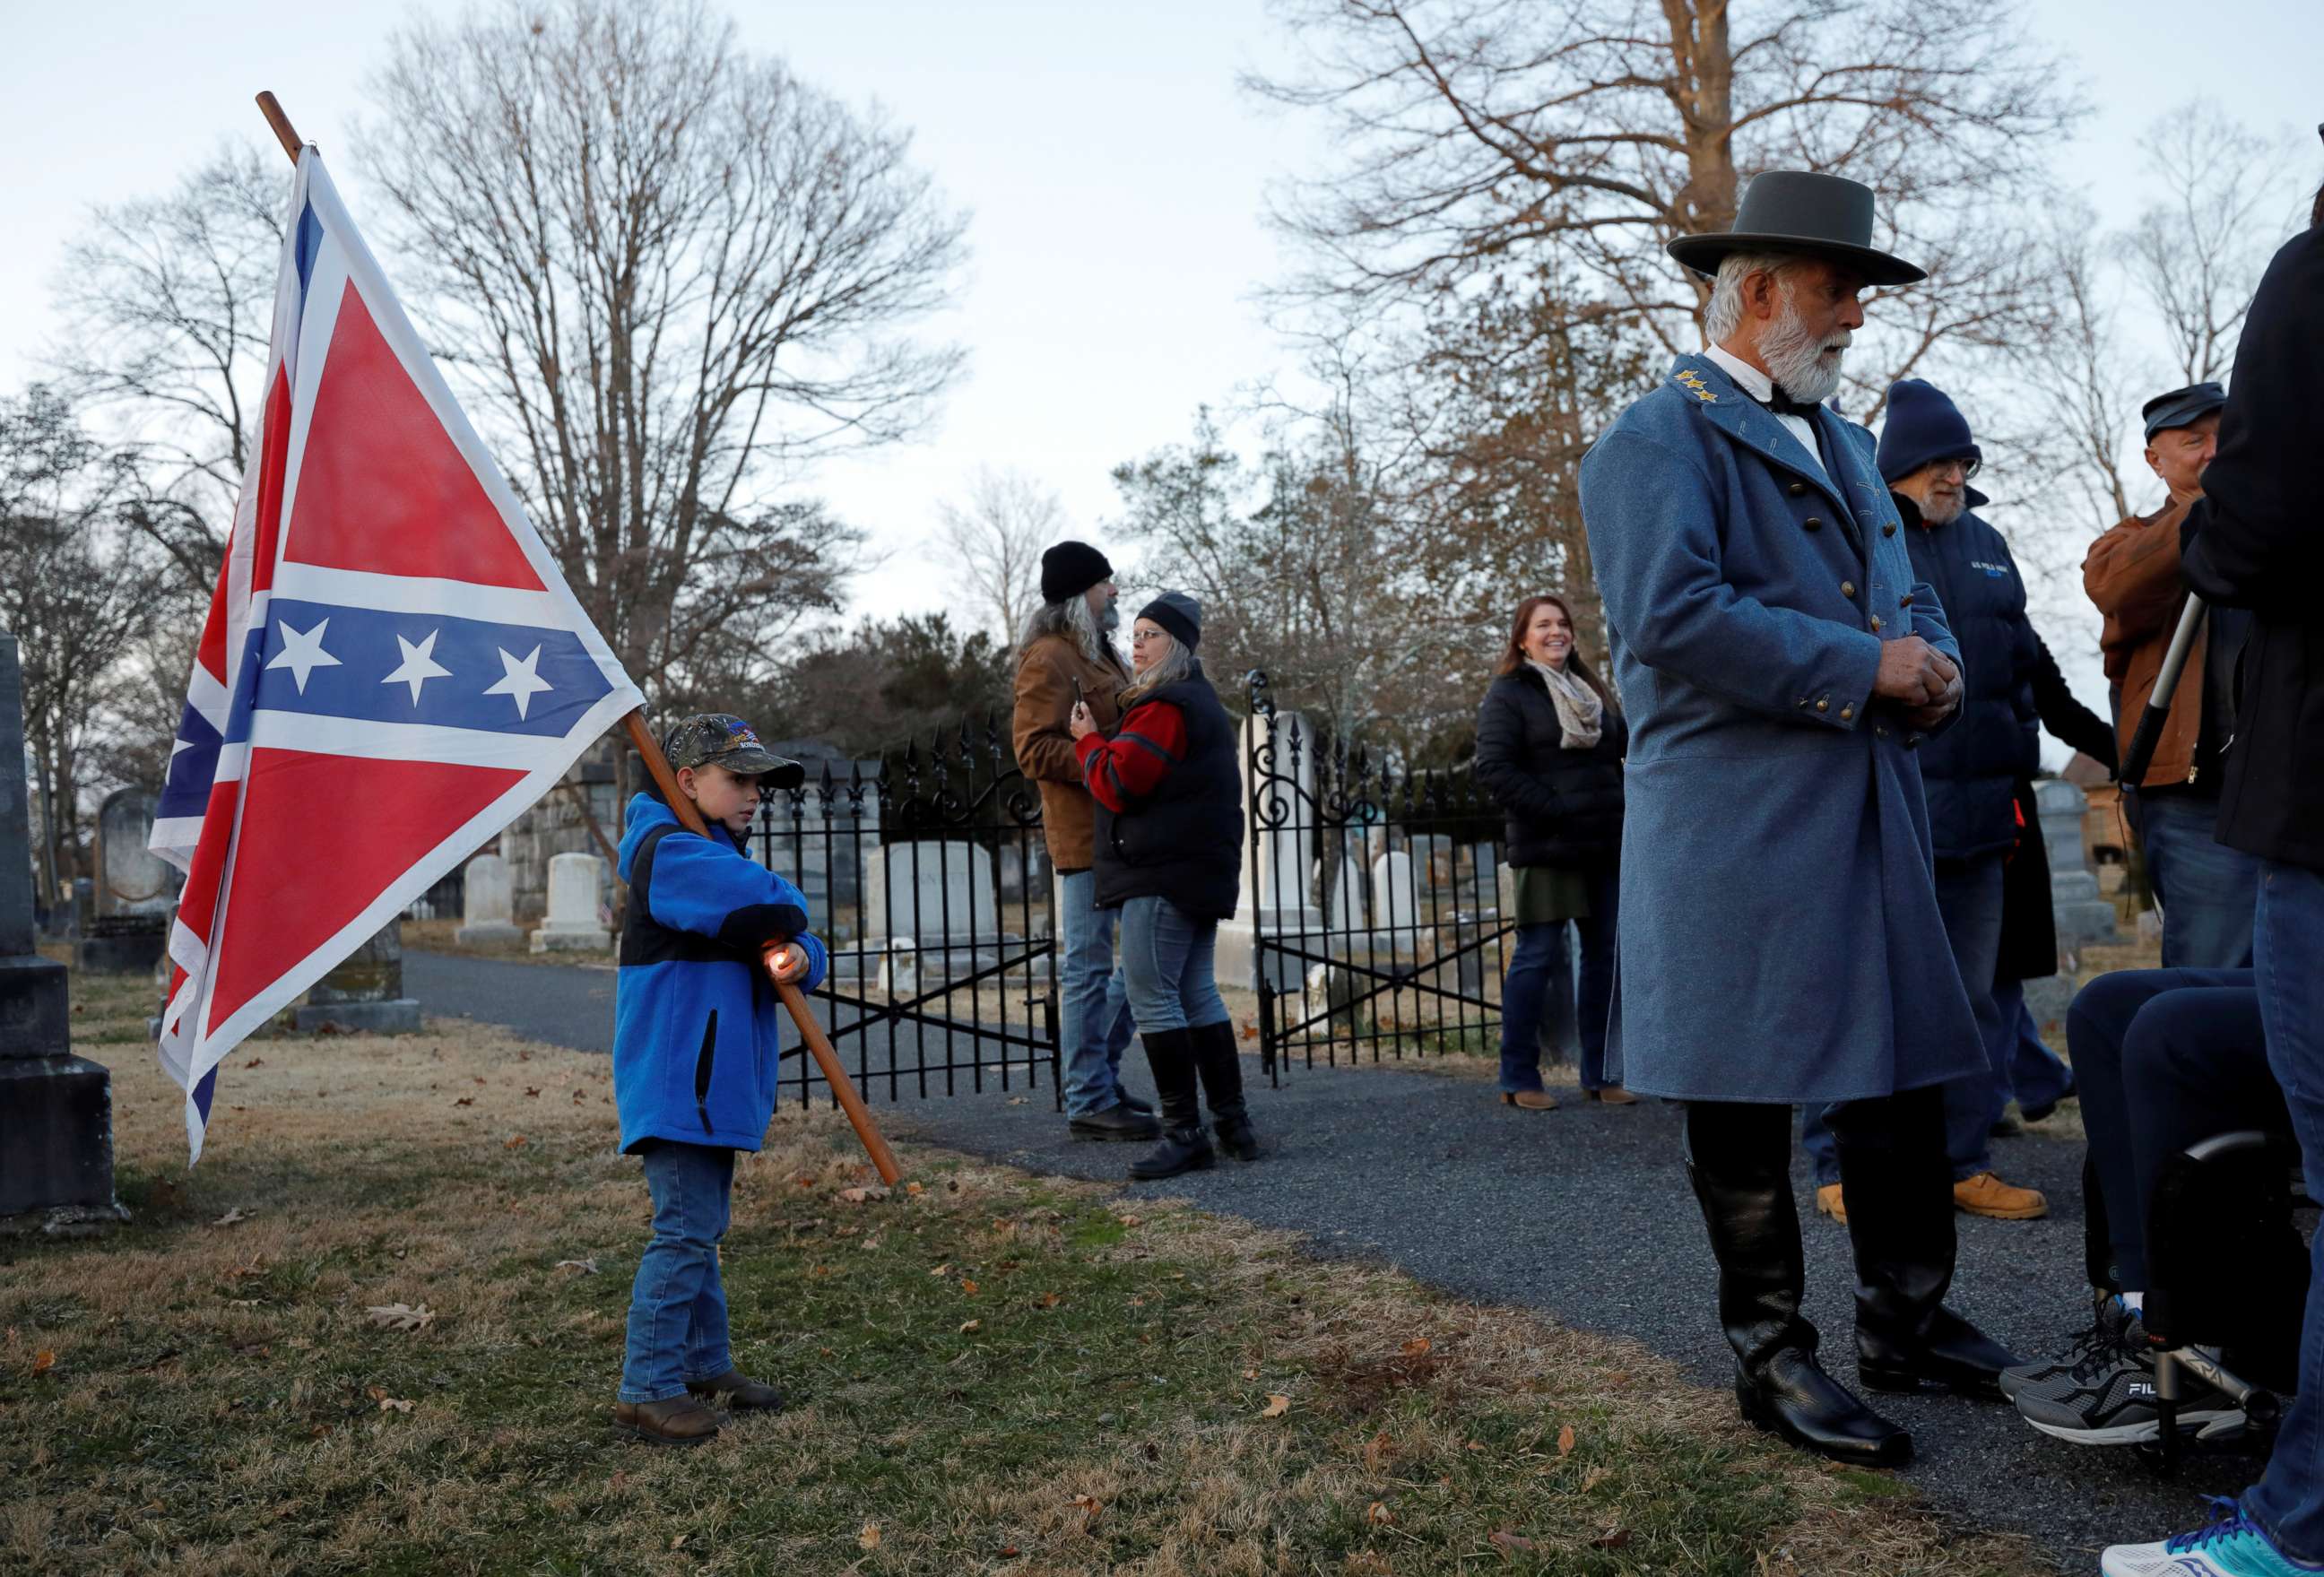 PHOTO: Supporters of Confederate statues and symbols, with a child carrying a Confederate flag and an impersonator of Confederate General Robert E. Lee, gather at the Jackson Memorial Cemetery on Lee-Jackson Day in Lexington, Va., Jan. 17, 2020. 